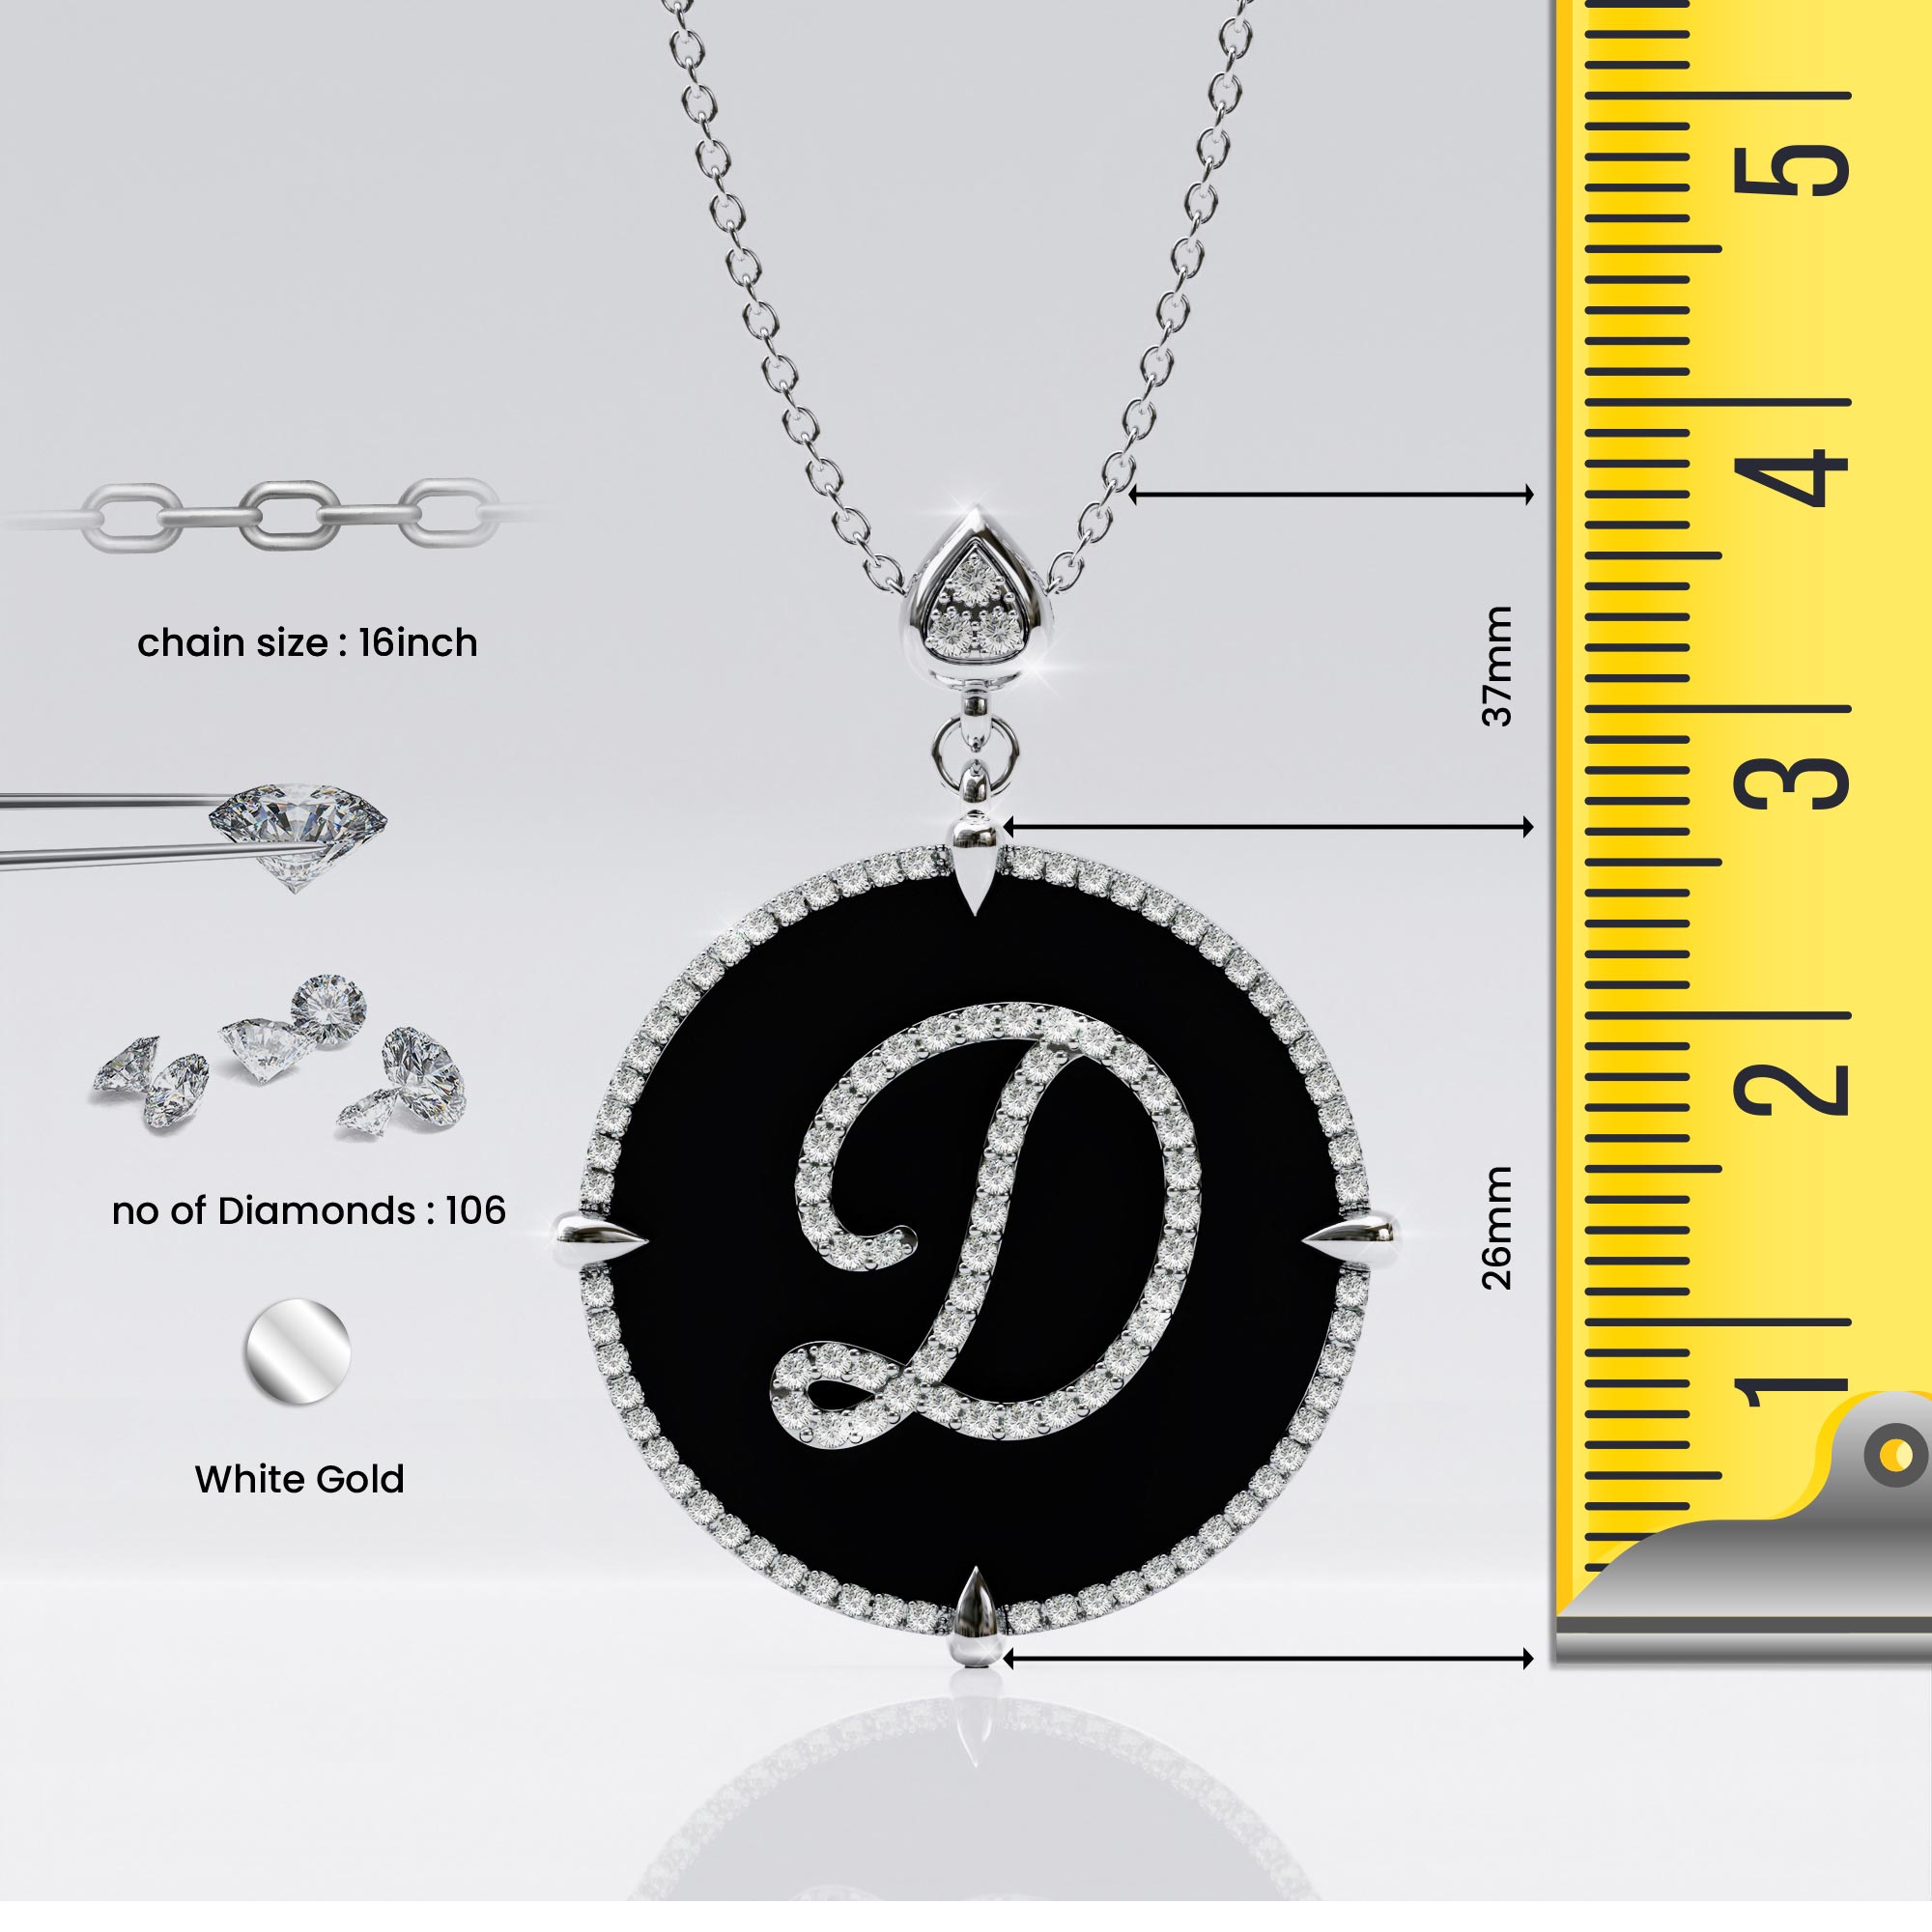 Dainty Initial D Jewel Pendant Necklace. - Initial Collection